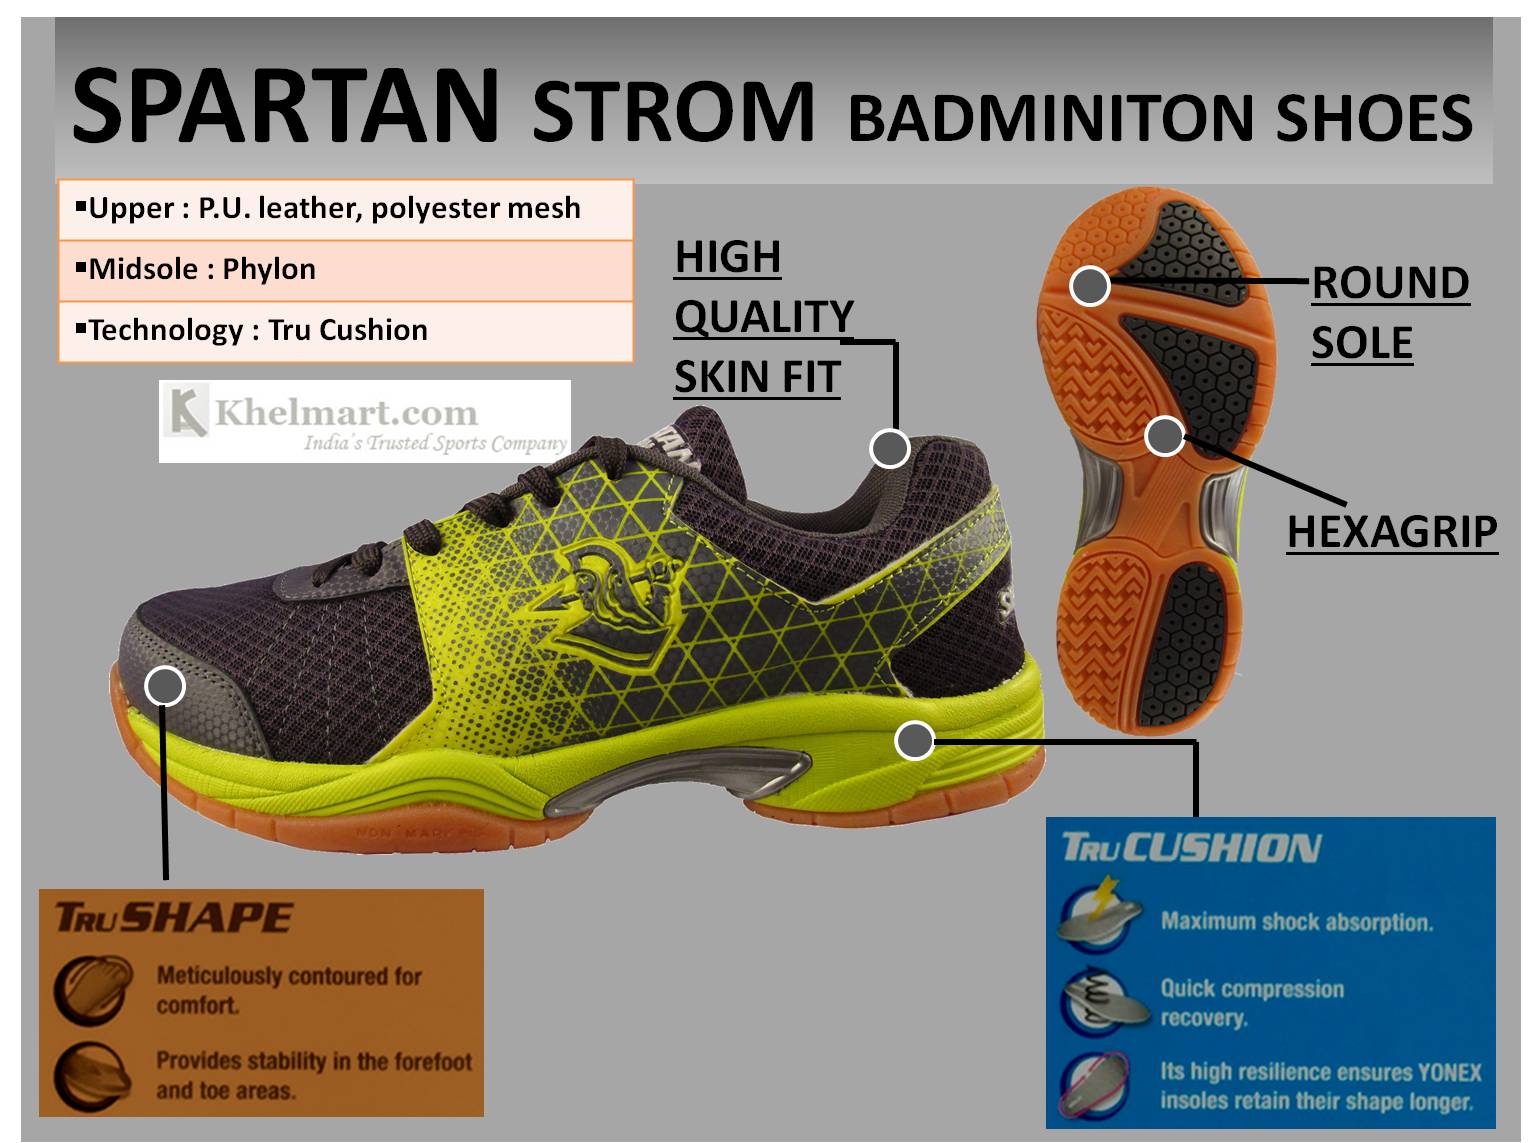 Spartan_Strom_badmniton_Shoes_color_Lime_and_Black.jpg